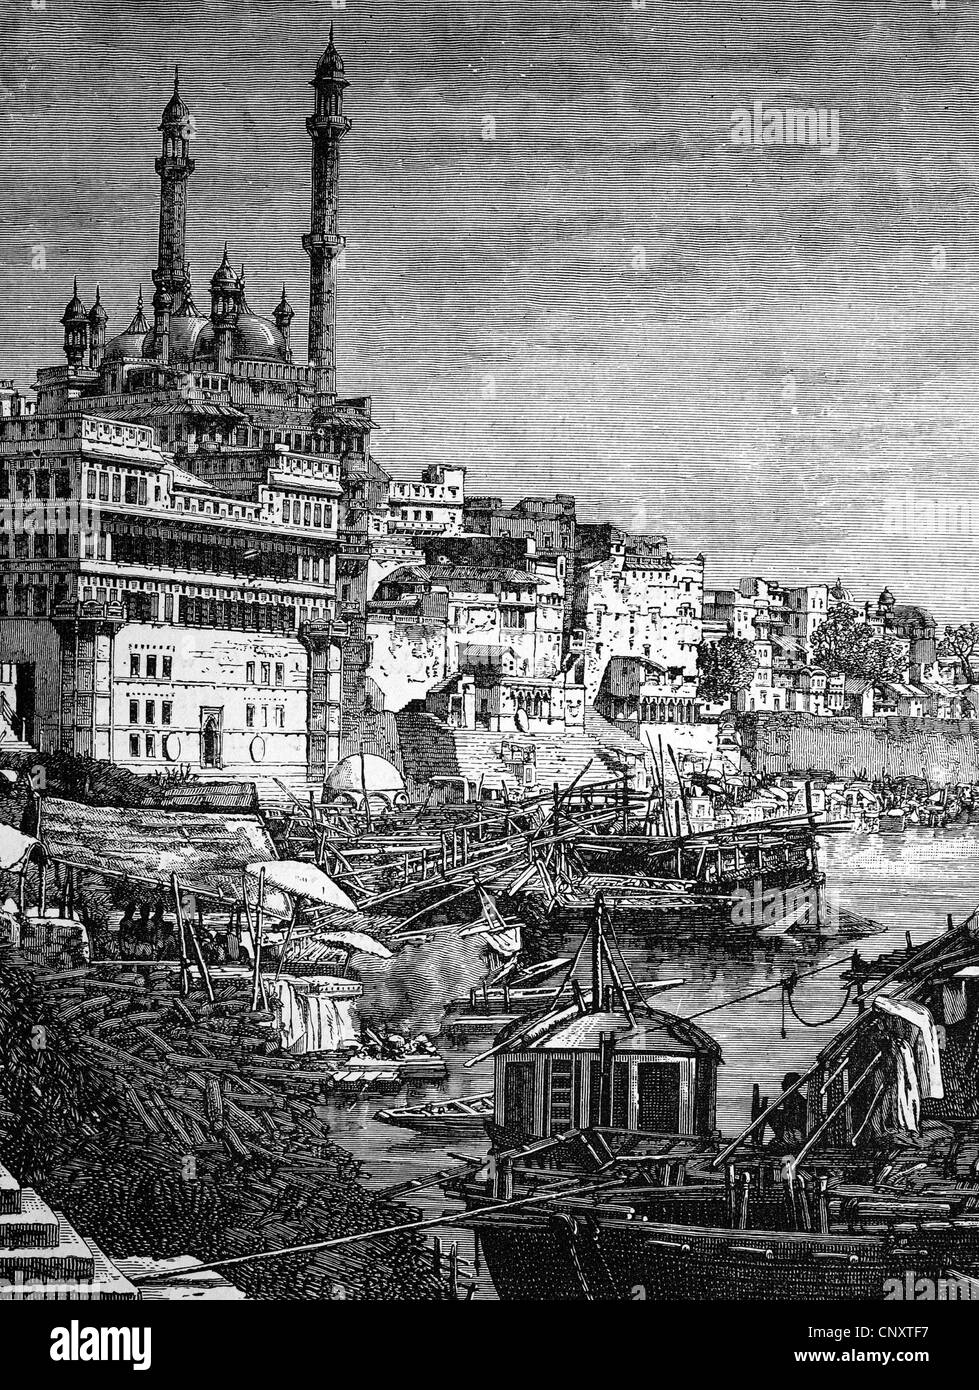 City of Benares on the Ganges River, India, historical illustration, wood engraving, circa 1888 Stock Photo